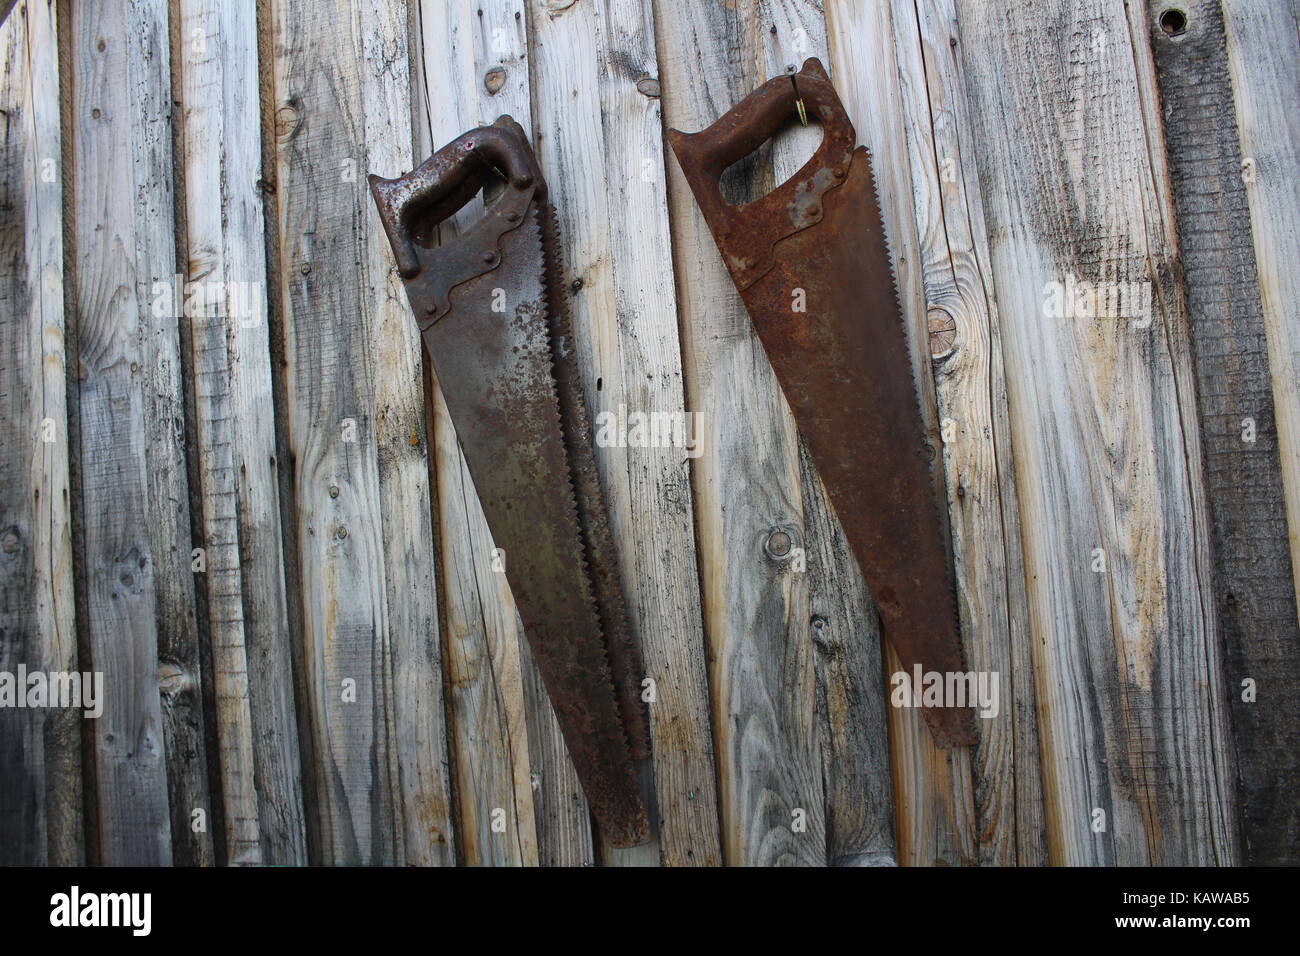 Two old rusty saws hanging on the wall of a wooden house. Stock Photo